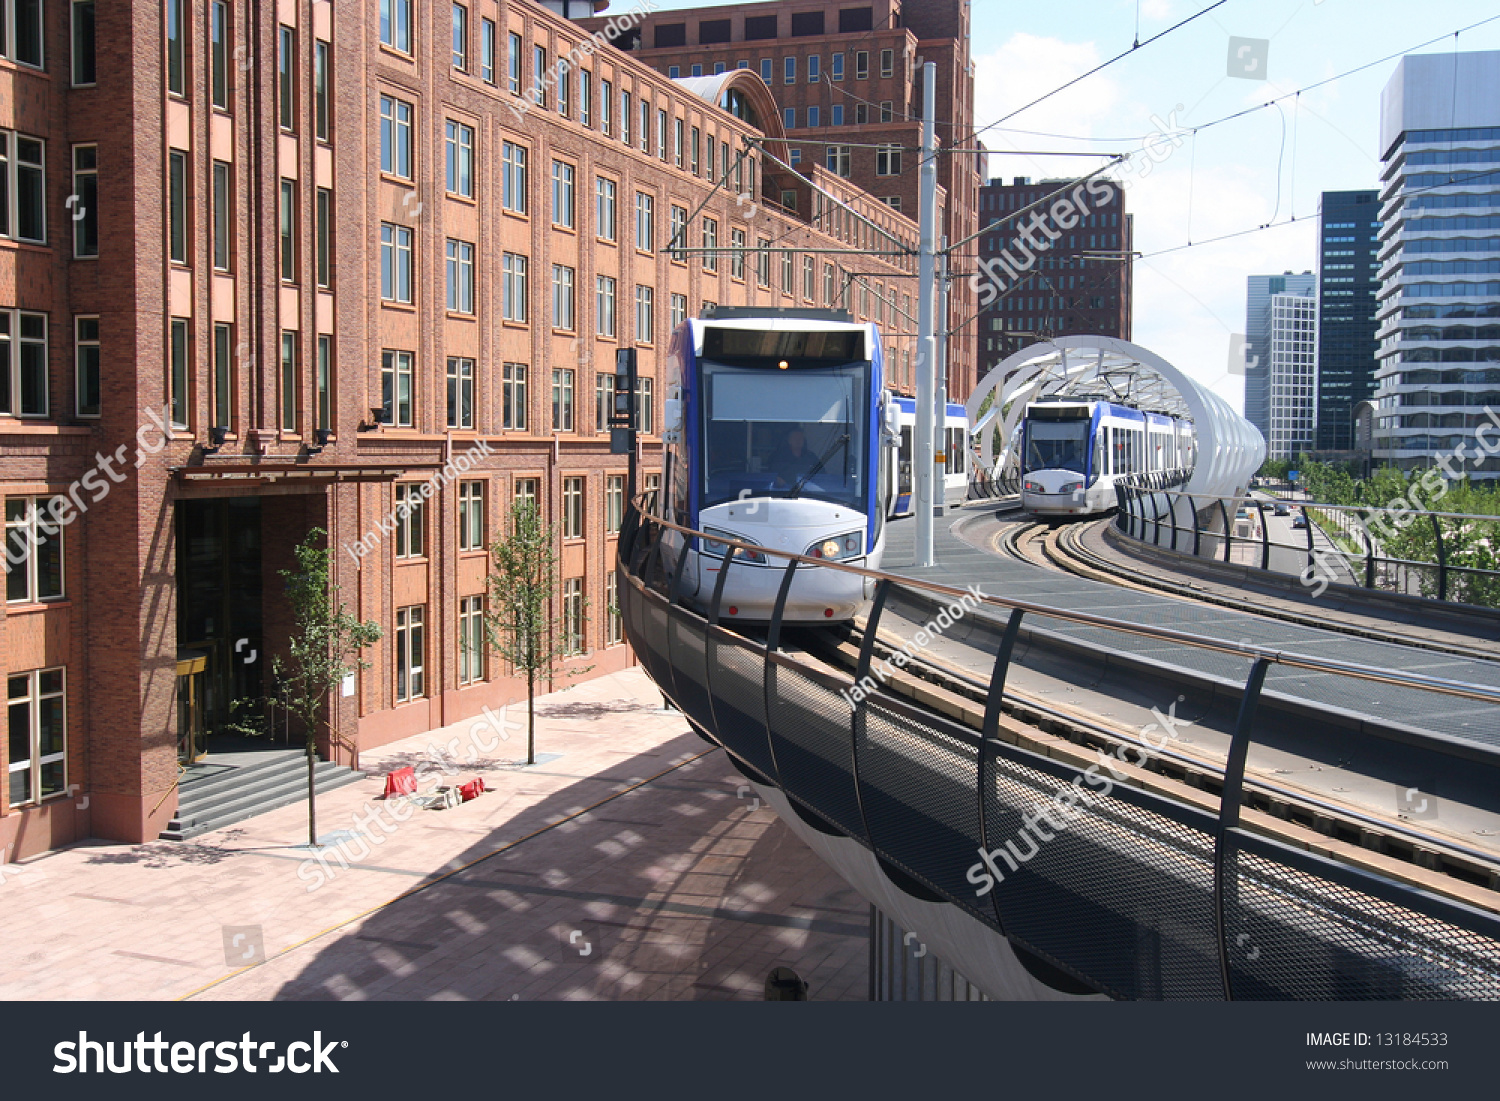 stock-photo-newly-built-elevated-tram-track-in-the-hague-holland-13184533.jpg